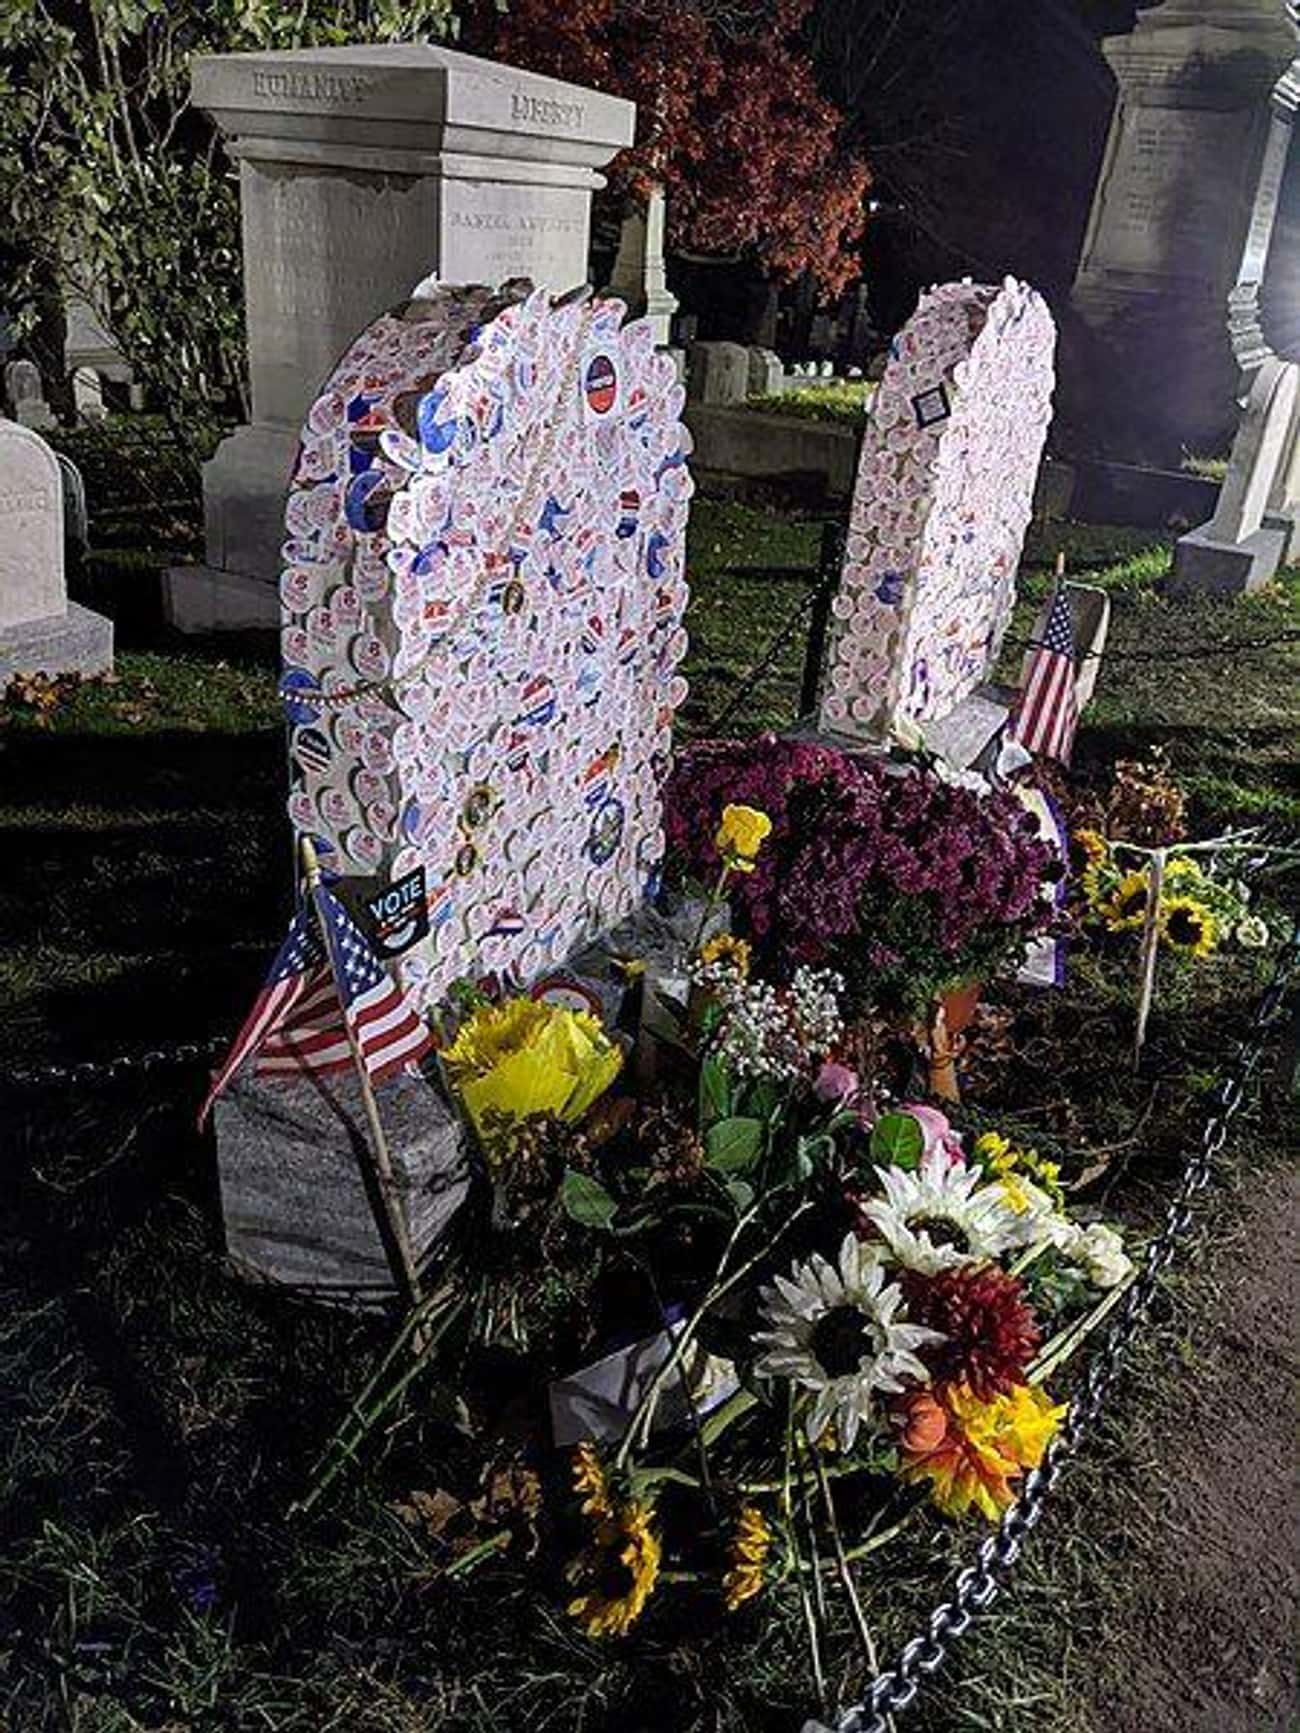 On Election Day, Susan B. Anthony's Grave Is Covered In 'I Voted' Stickers